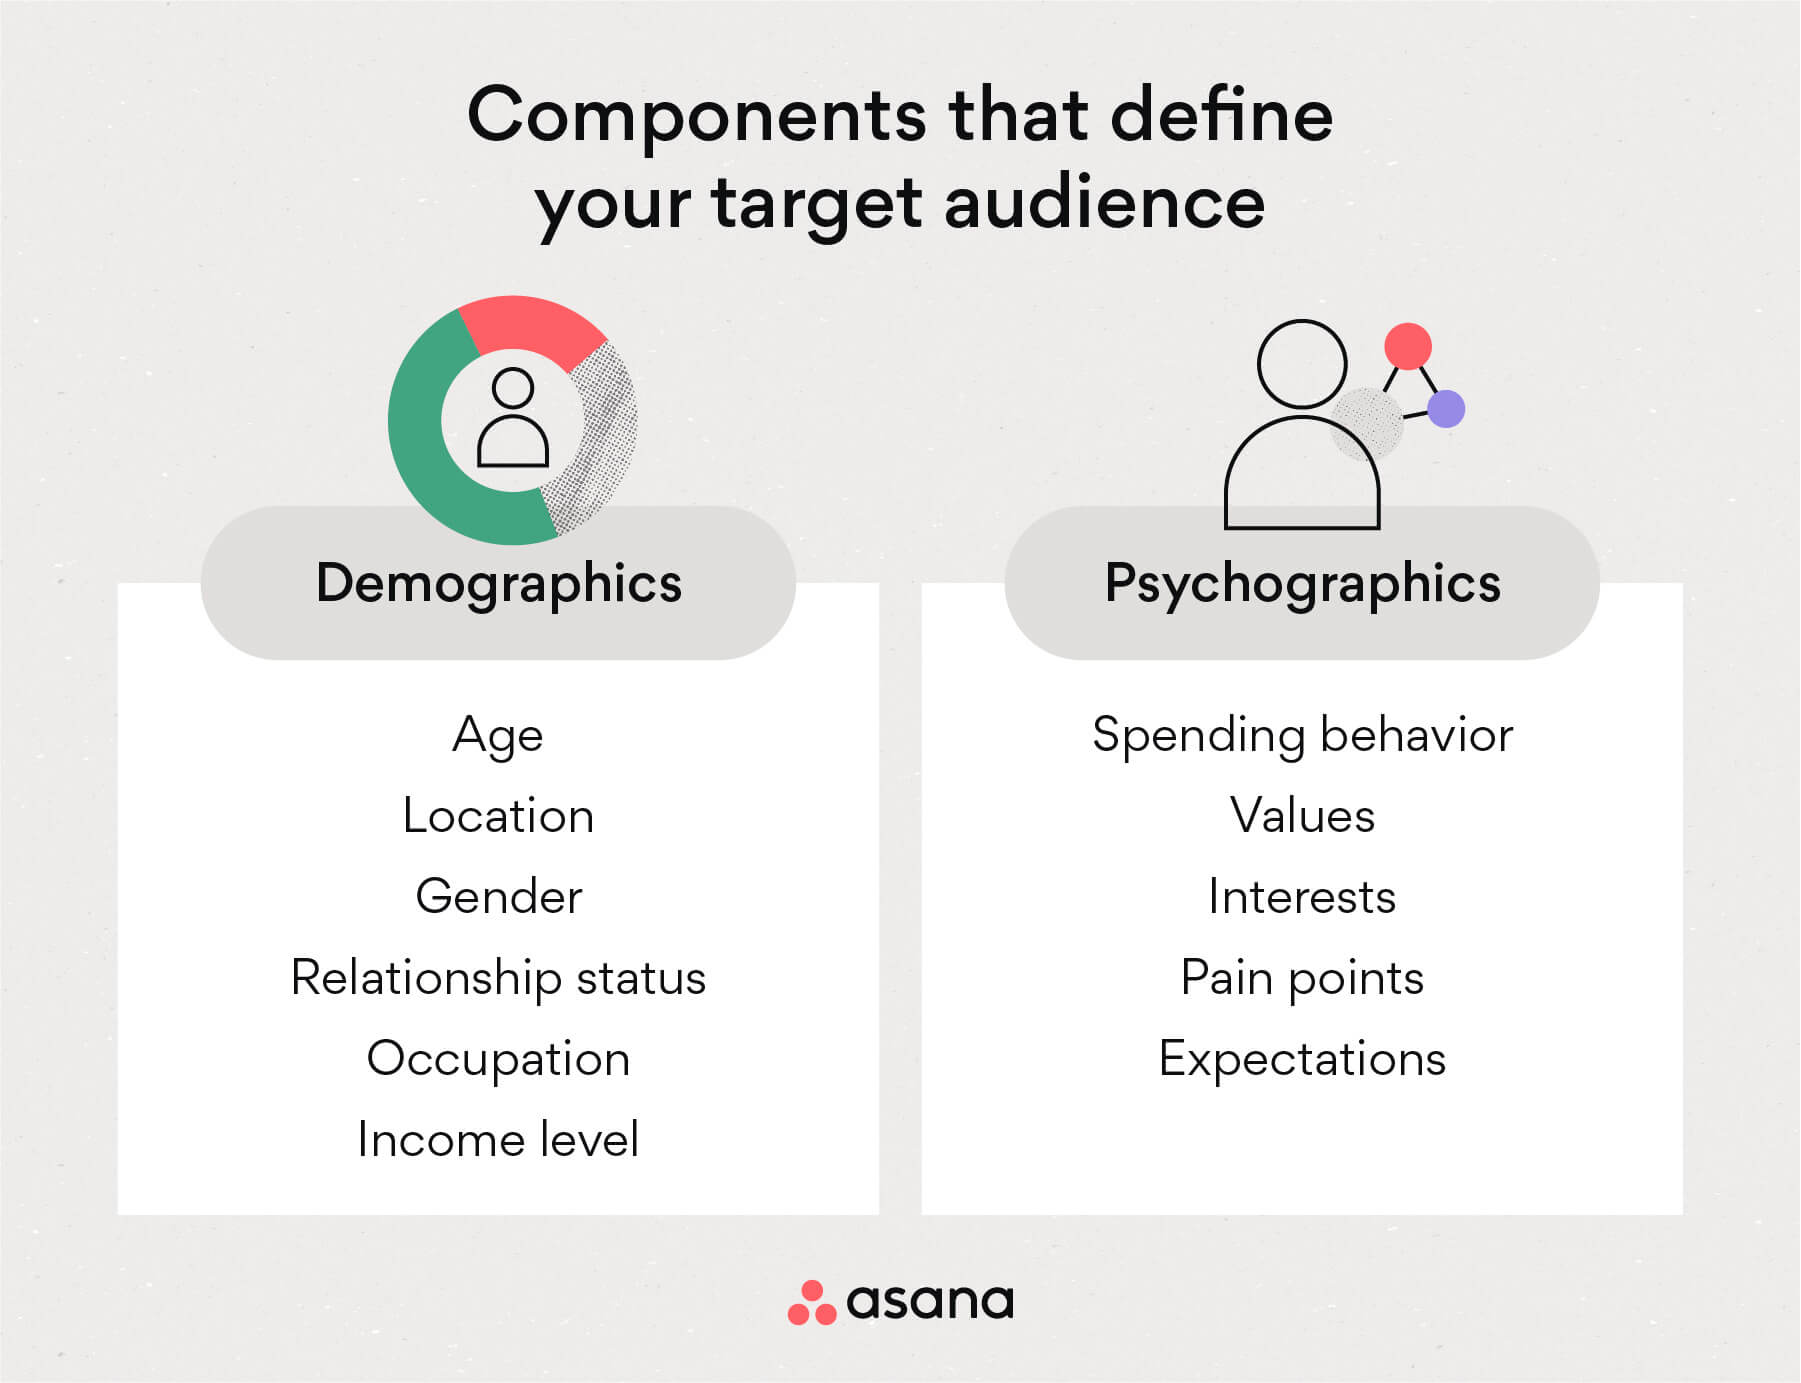 [inline illustration] Components that define your target audience (infographic)